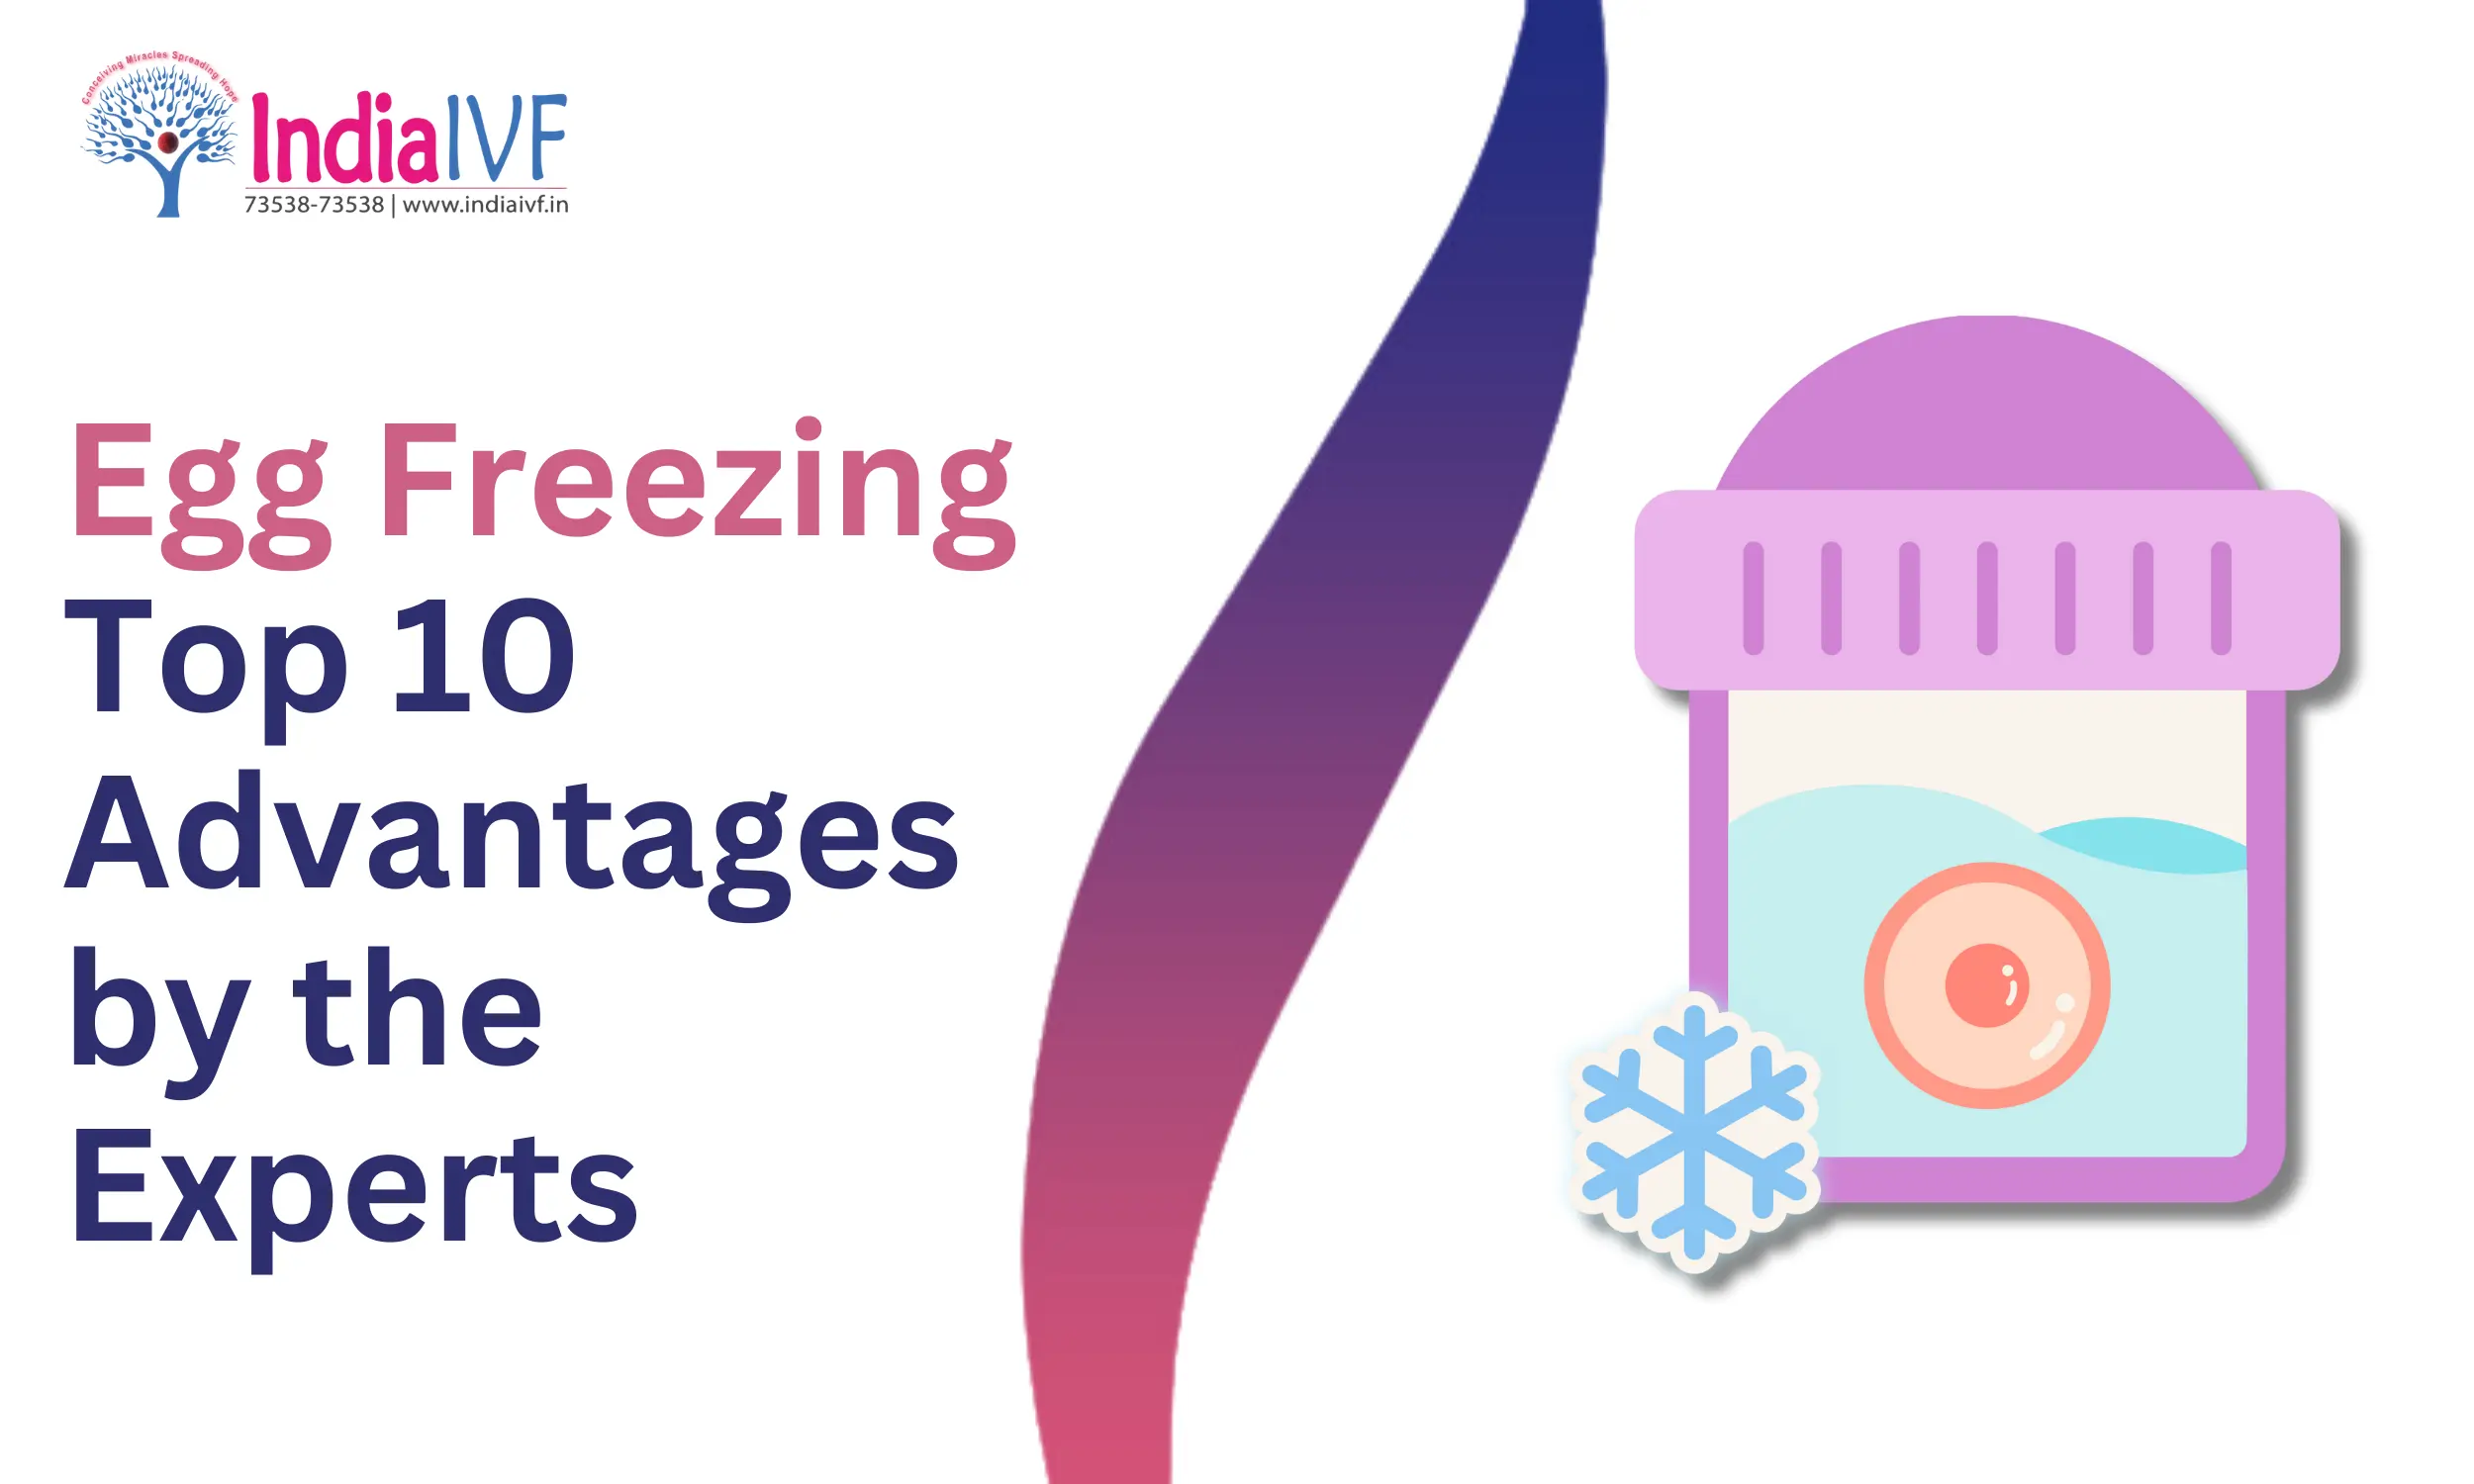 Egg Freezing Top 10 Advantages by the Experts